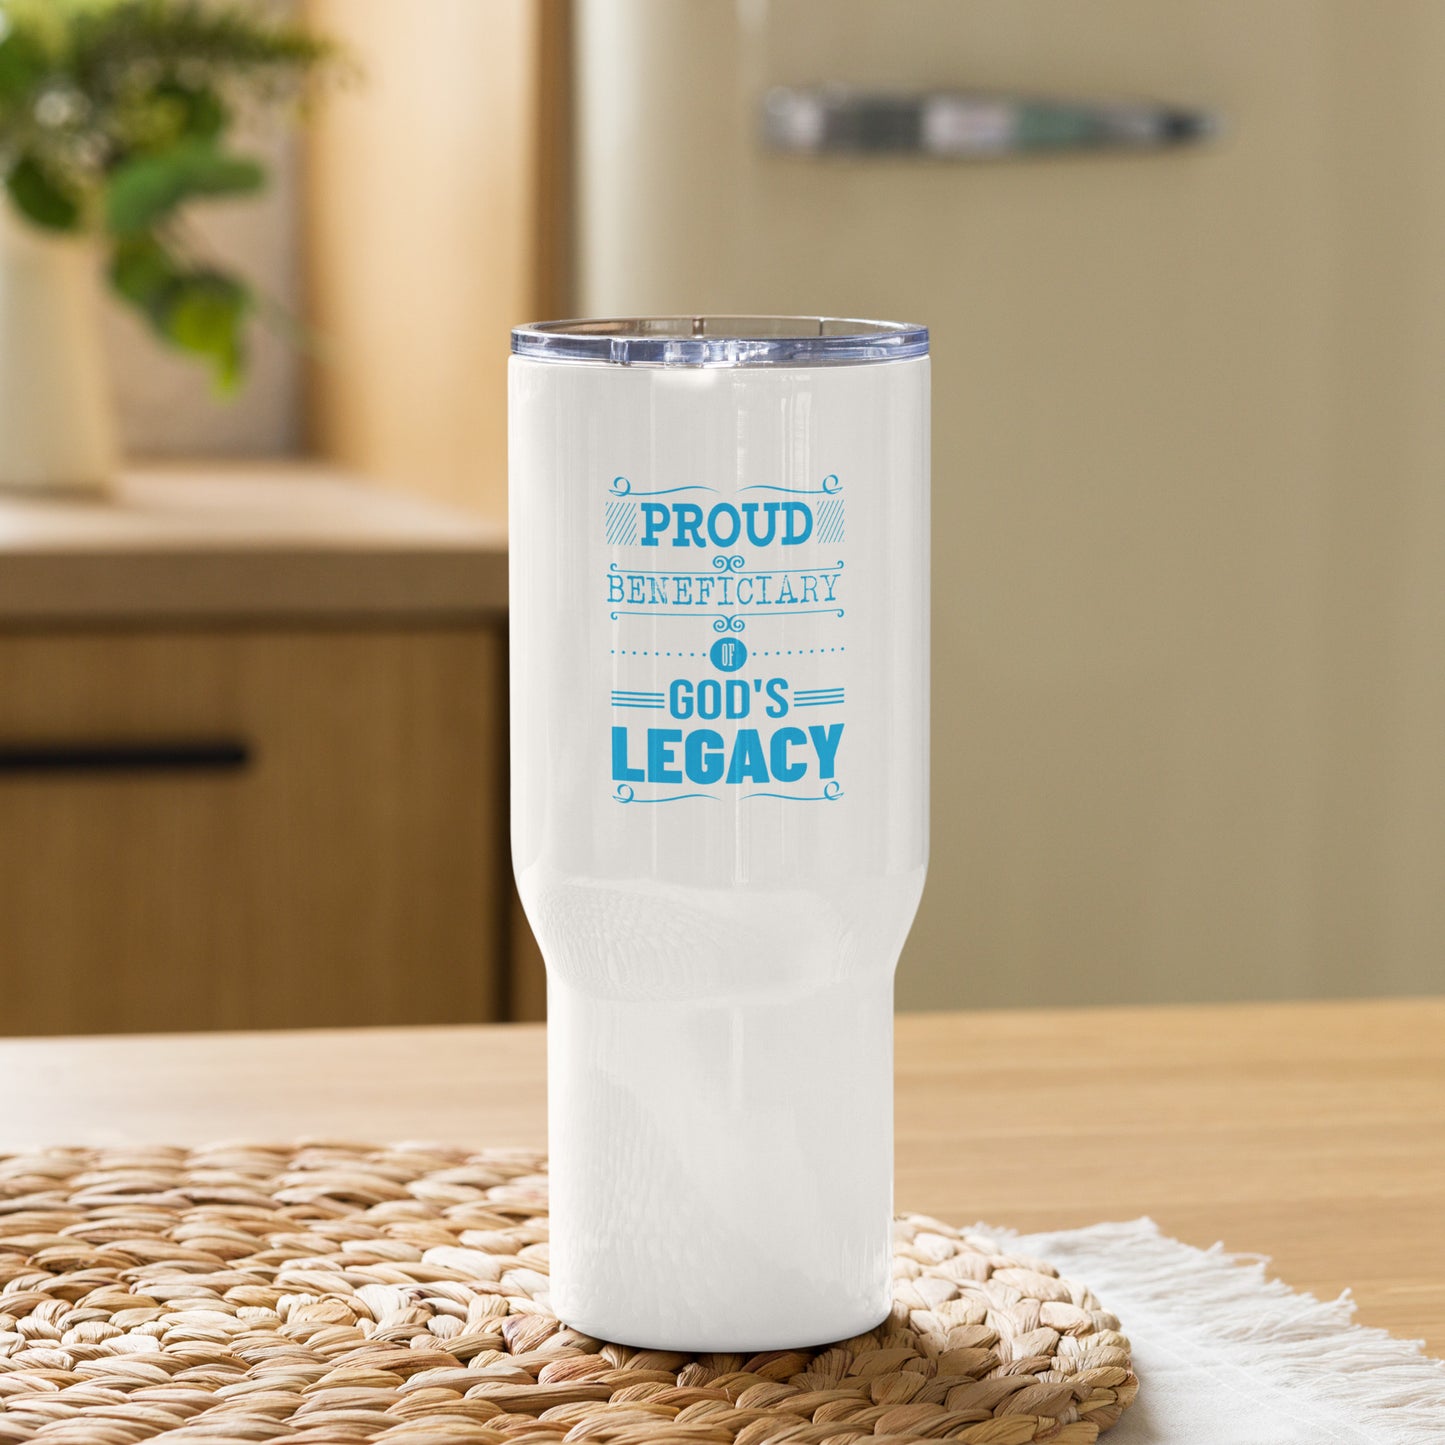 Proud Beneficiary Of God's Legacy Christian Travel mug with a handle